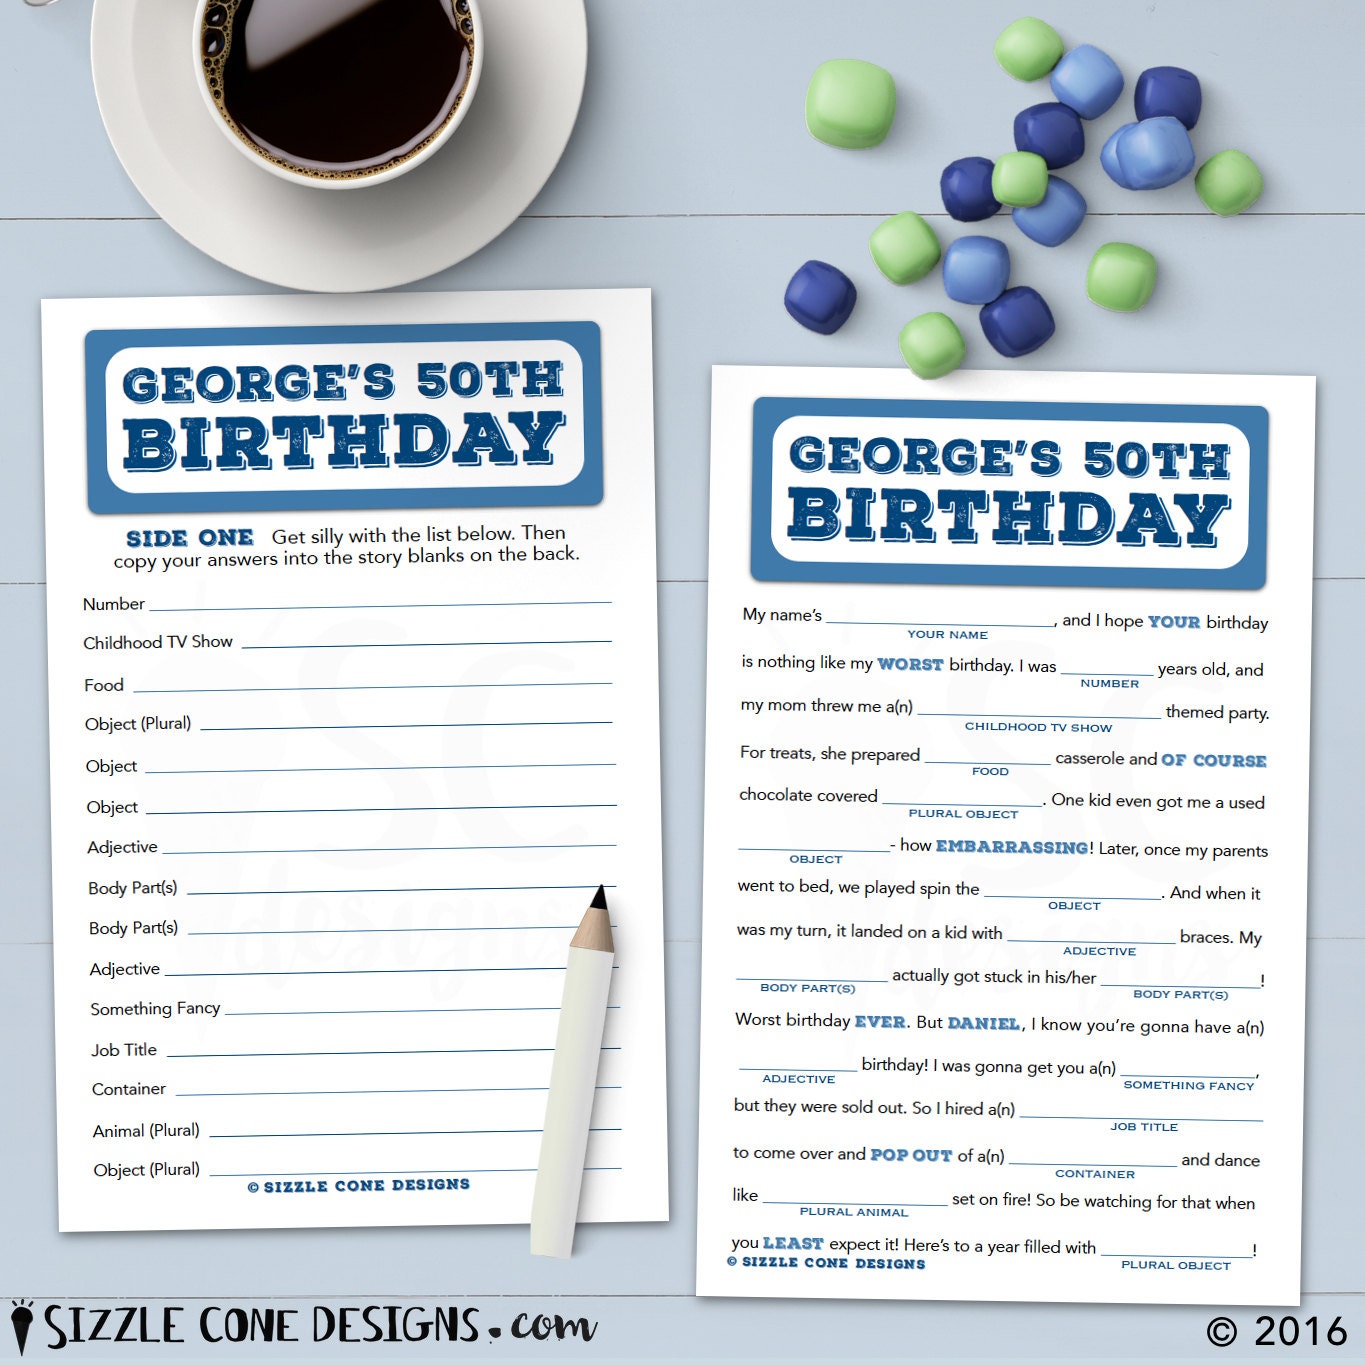 personalized-adult-birthday-mad-lib-party-game-printable-or